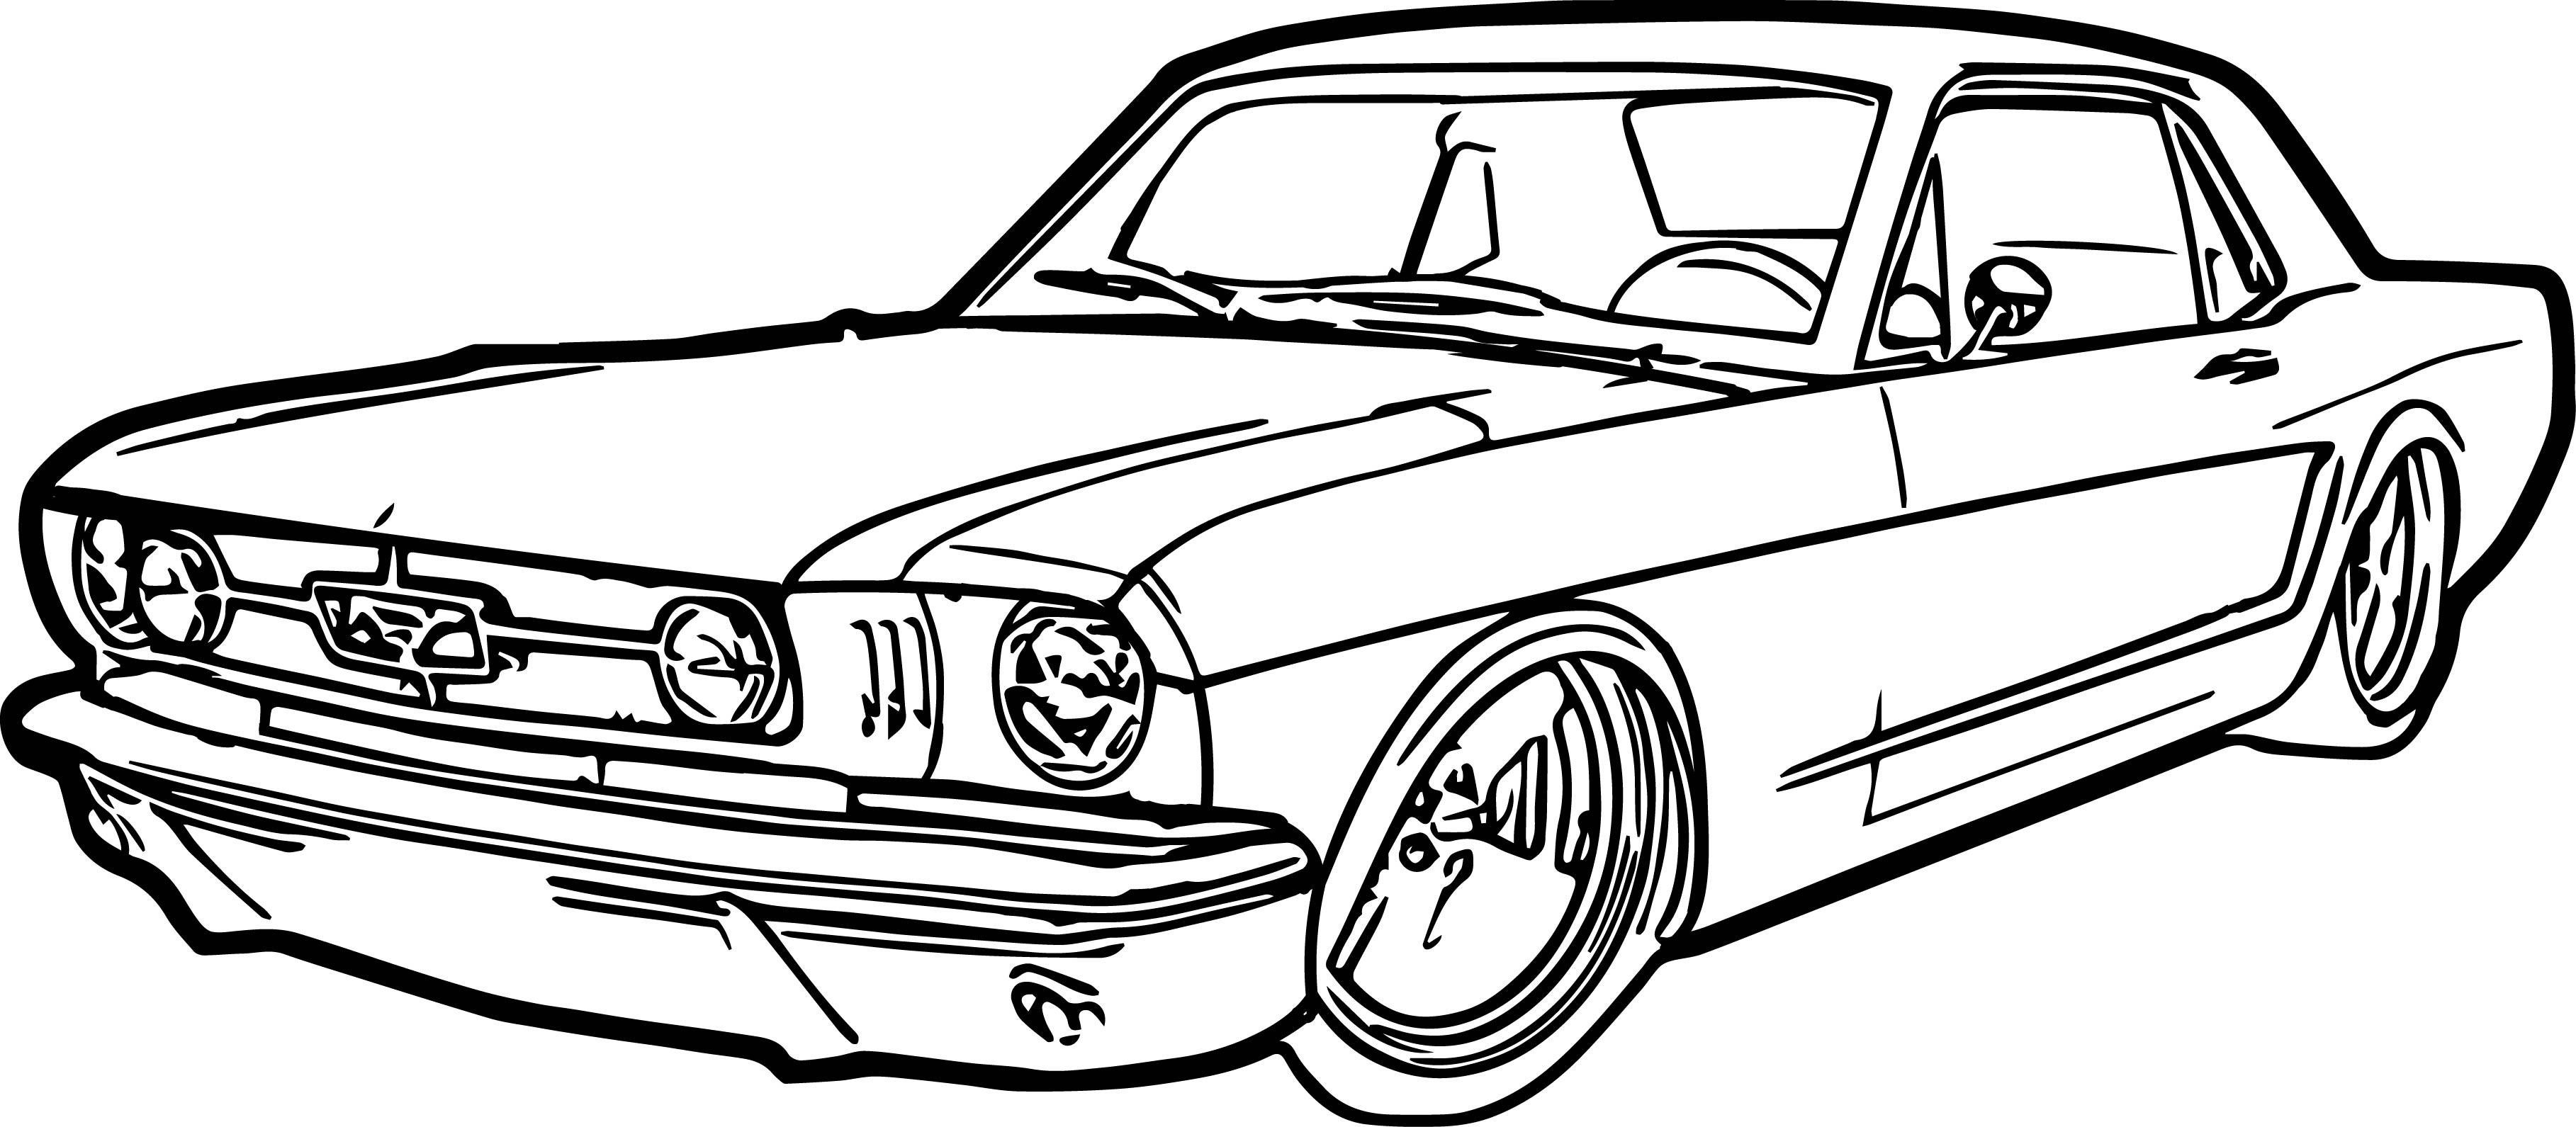 Demolition Derby Coloring Pages at GetColorings.com | Free printable